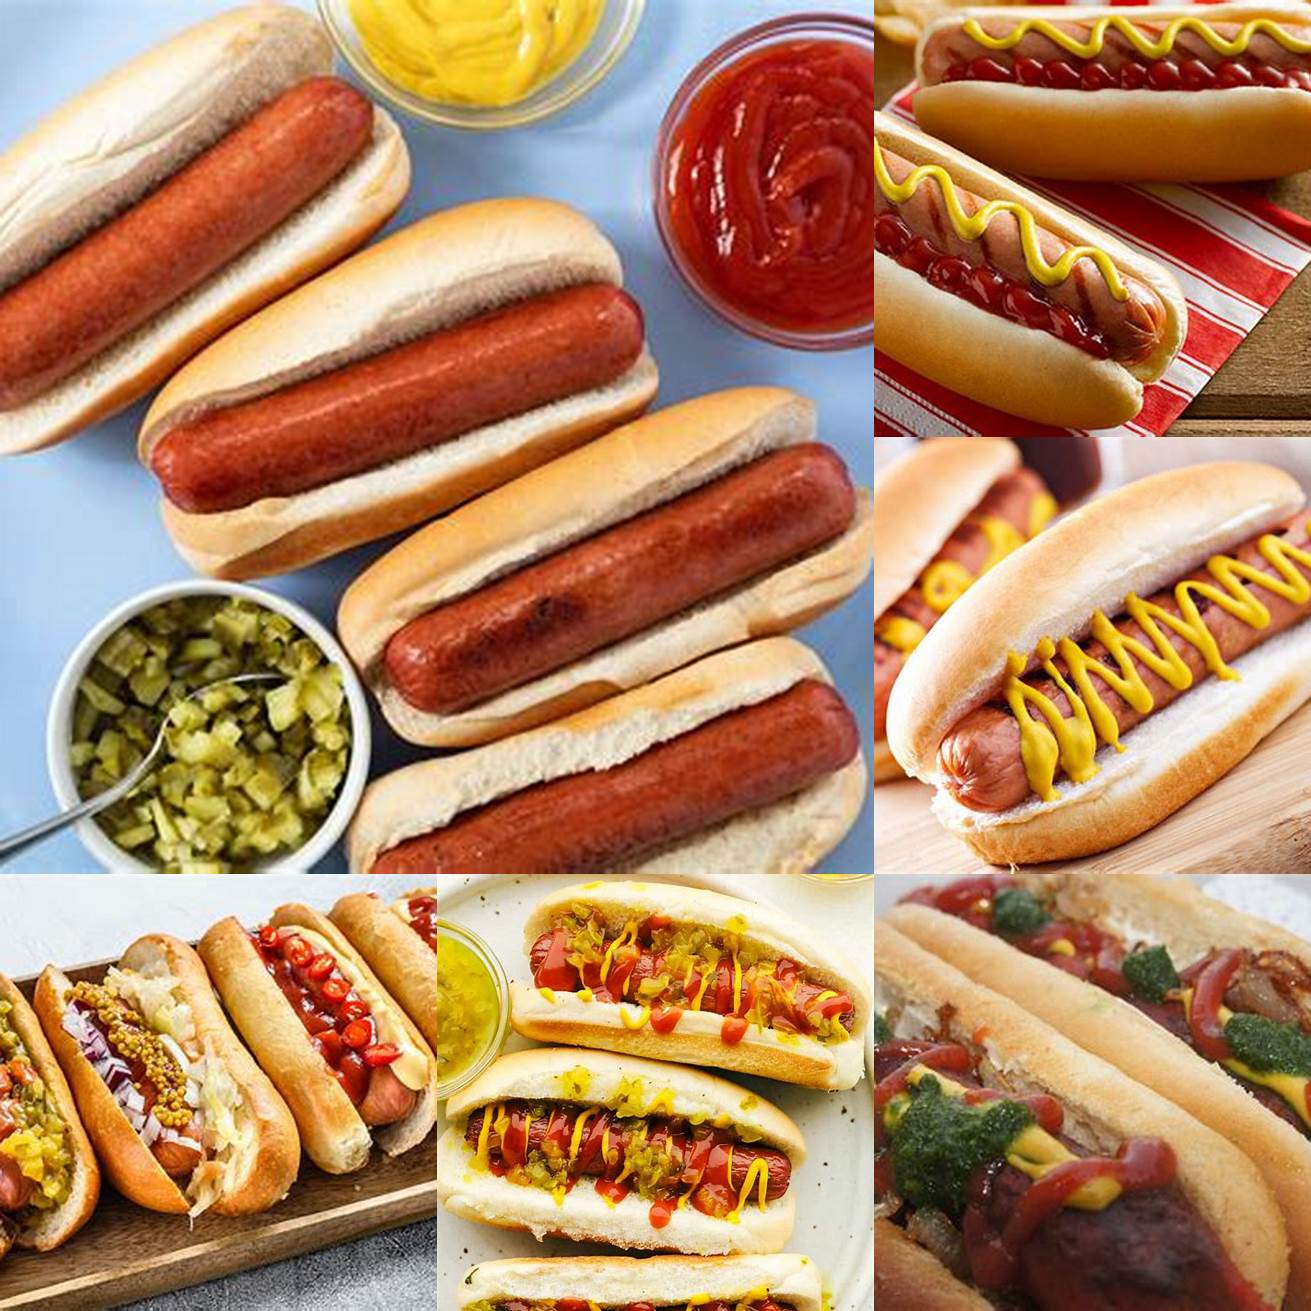 Hot Dogs Another classic American dish hot dogs are made with a sausage and are often served with mustard ketchup and onions